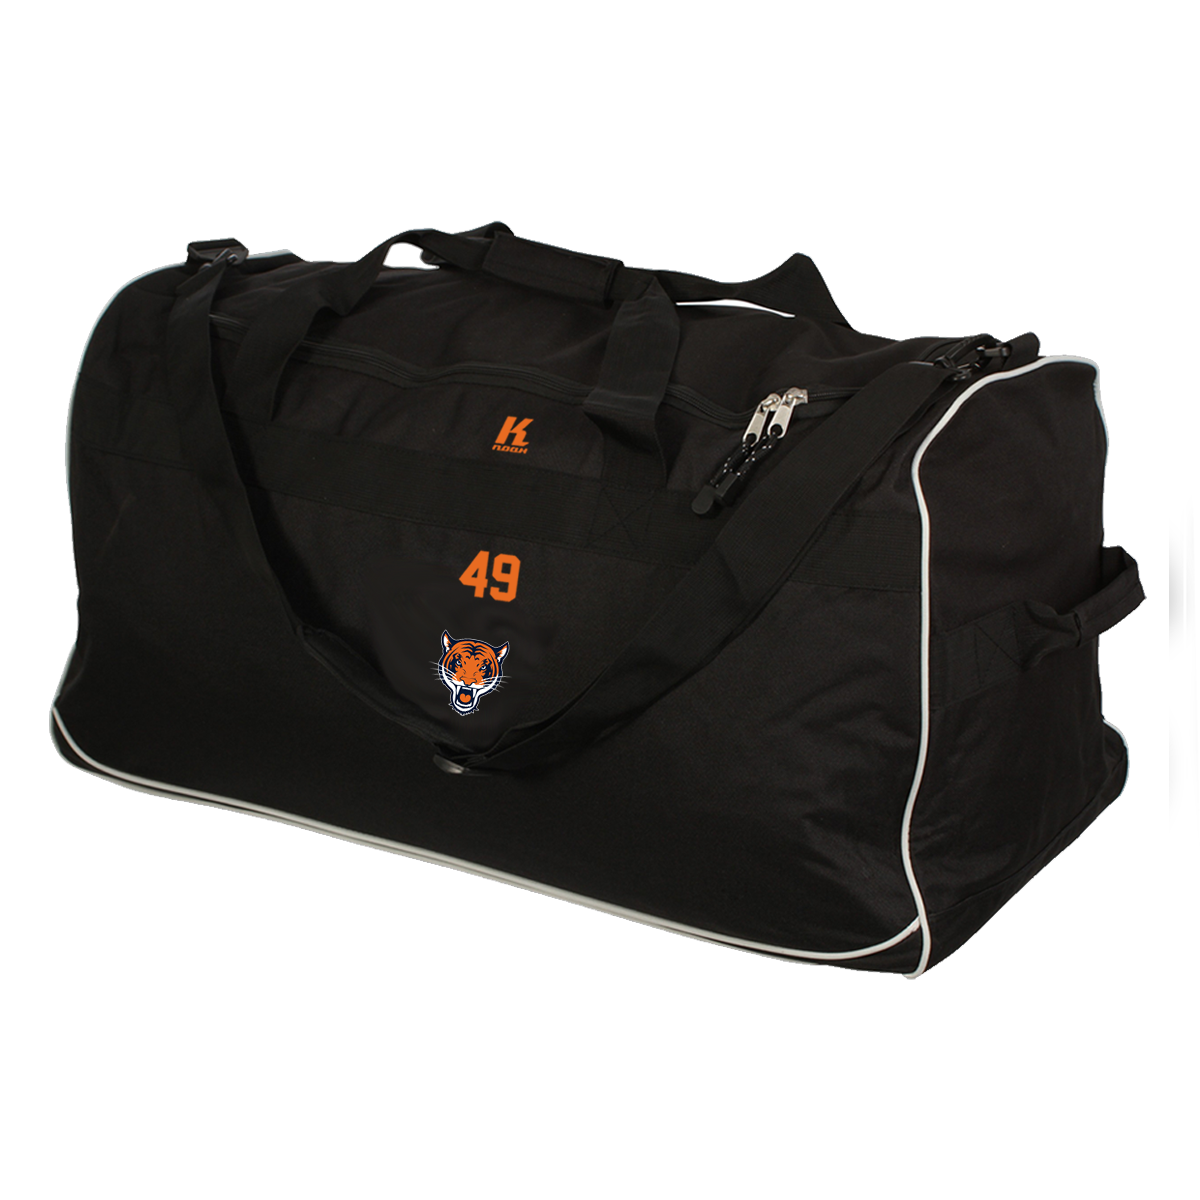 Tigers Jumbo Team Kitbag with Playernumber or Initials